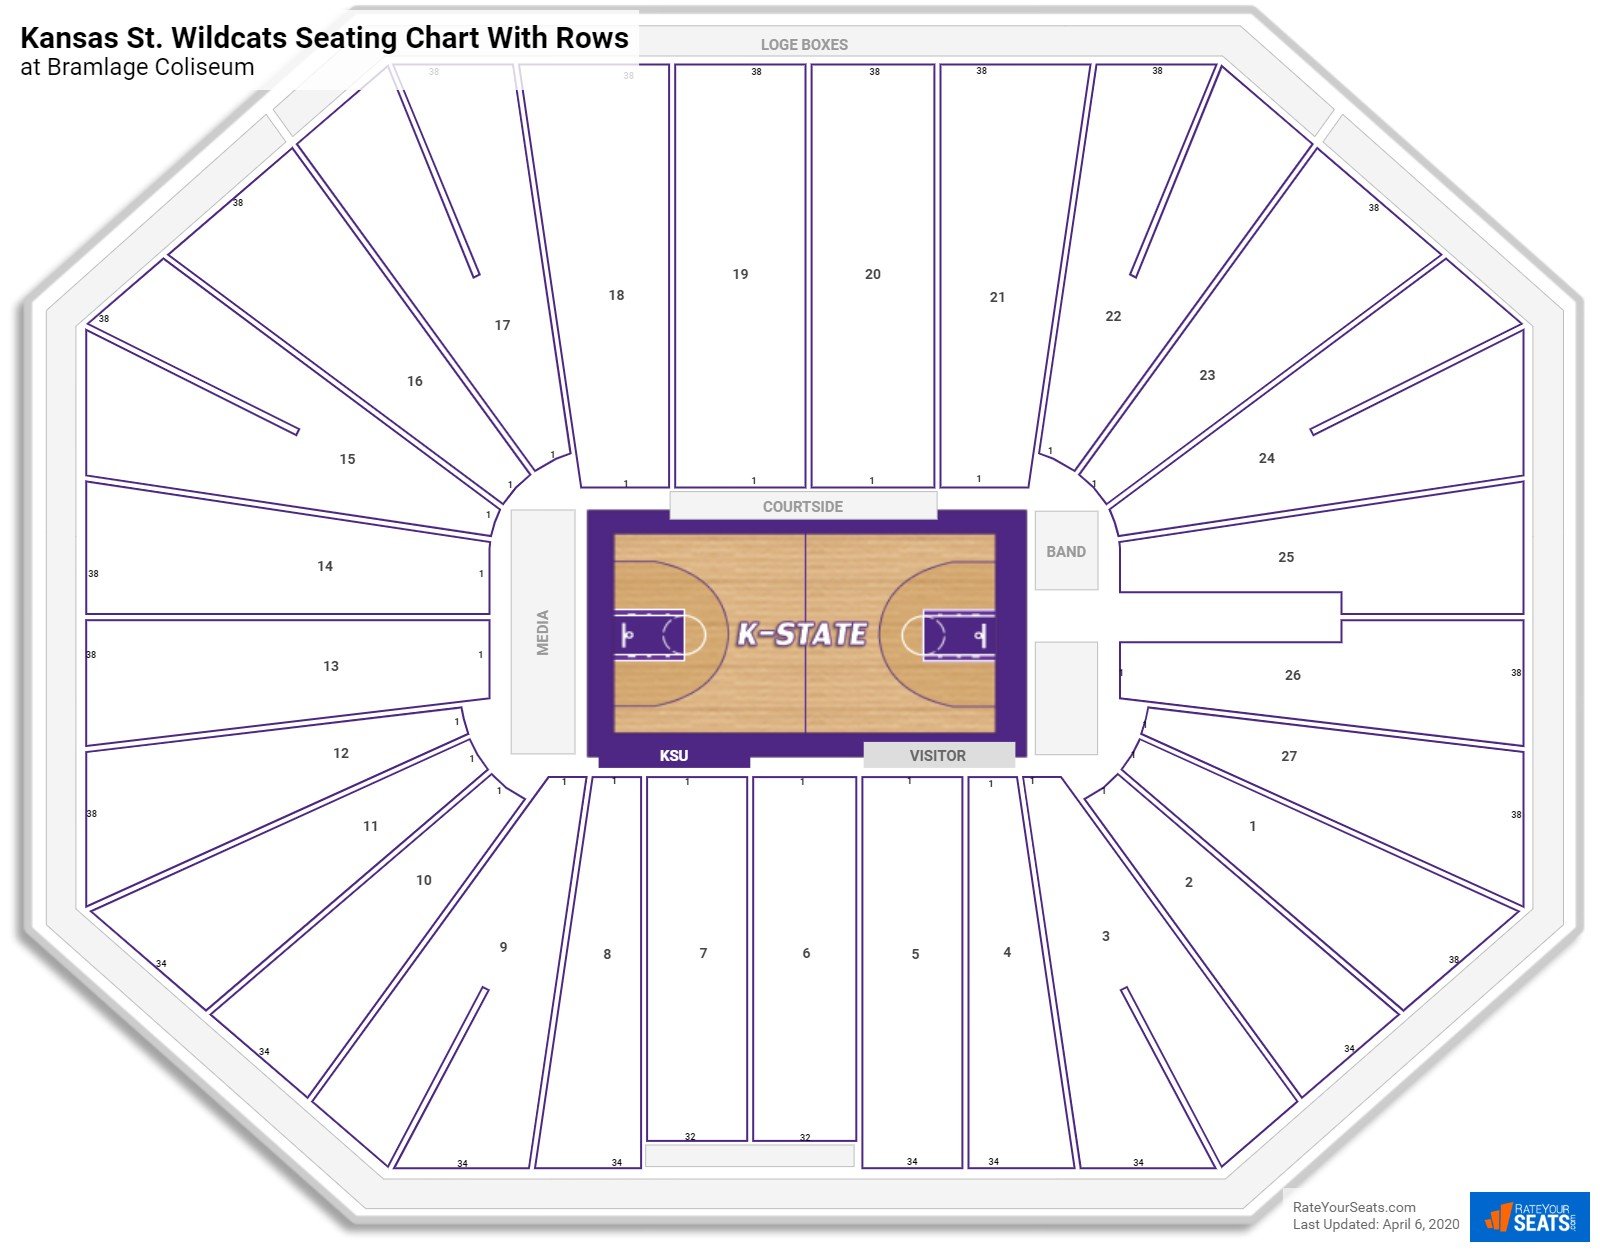 Bramlage Coliseum seating chart with row numbers